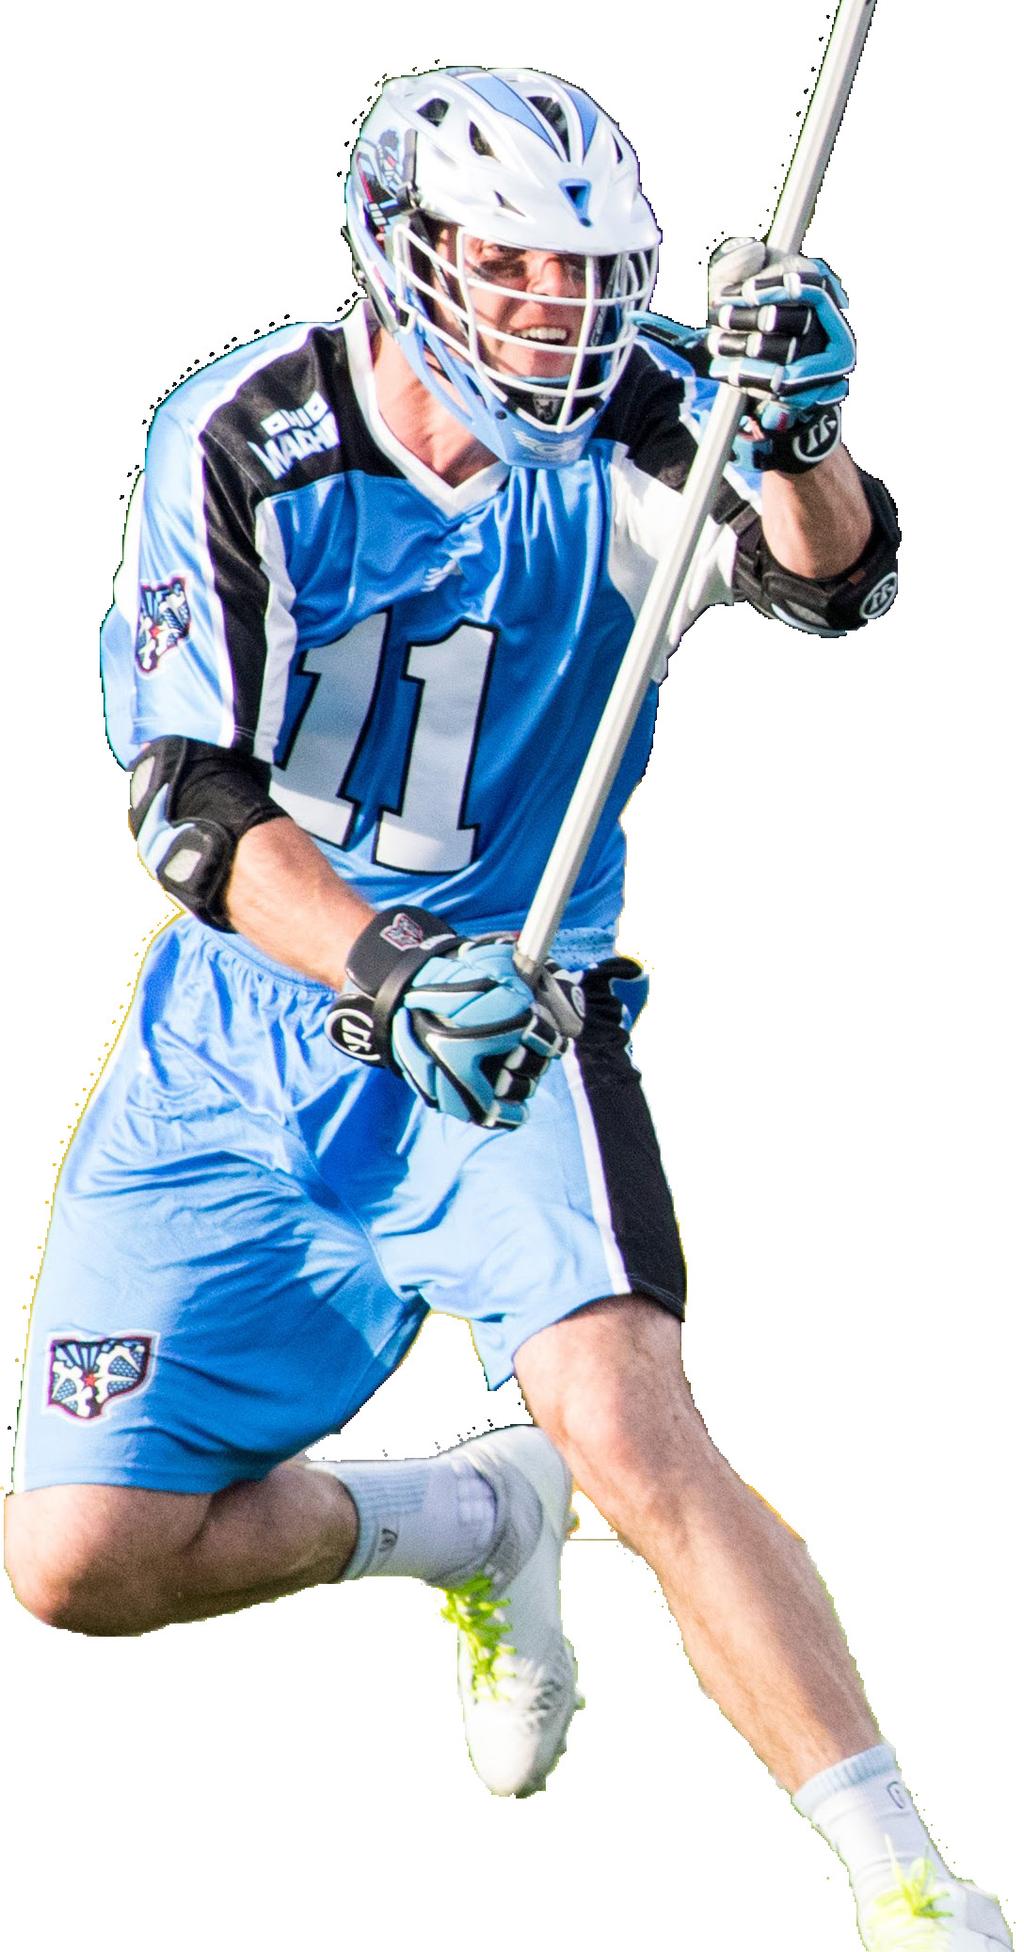 MATT MCMAHON DEFENSE #11 6 4 225 LBS BORN 12/30/92 HOW ACQUIRED: 2015 MLL DRAFT (35TH OVERALL) MATT AT A GLANCE 2017 MLL SEASON: Finished with 43 ground balls and 14 caused turnovers in 14 games